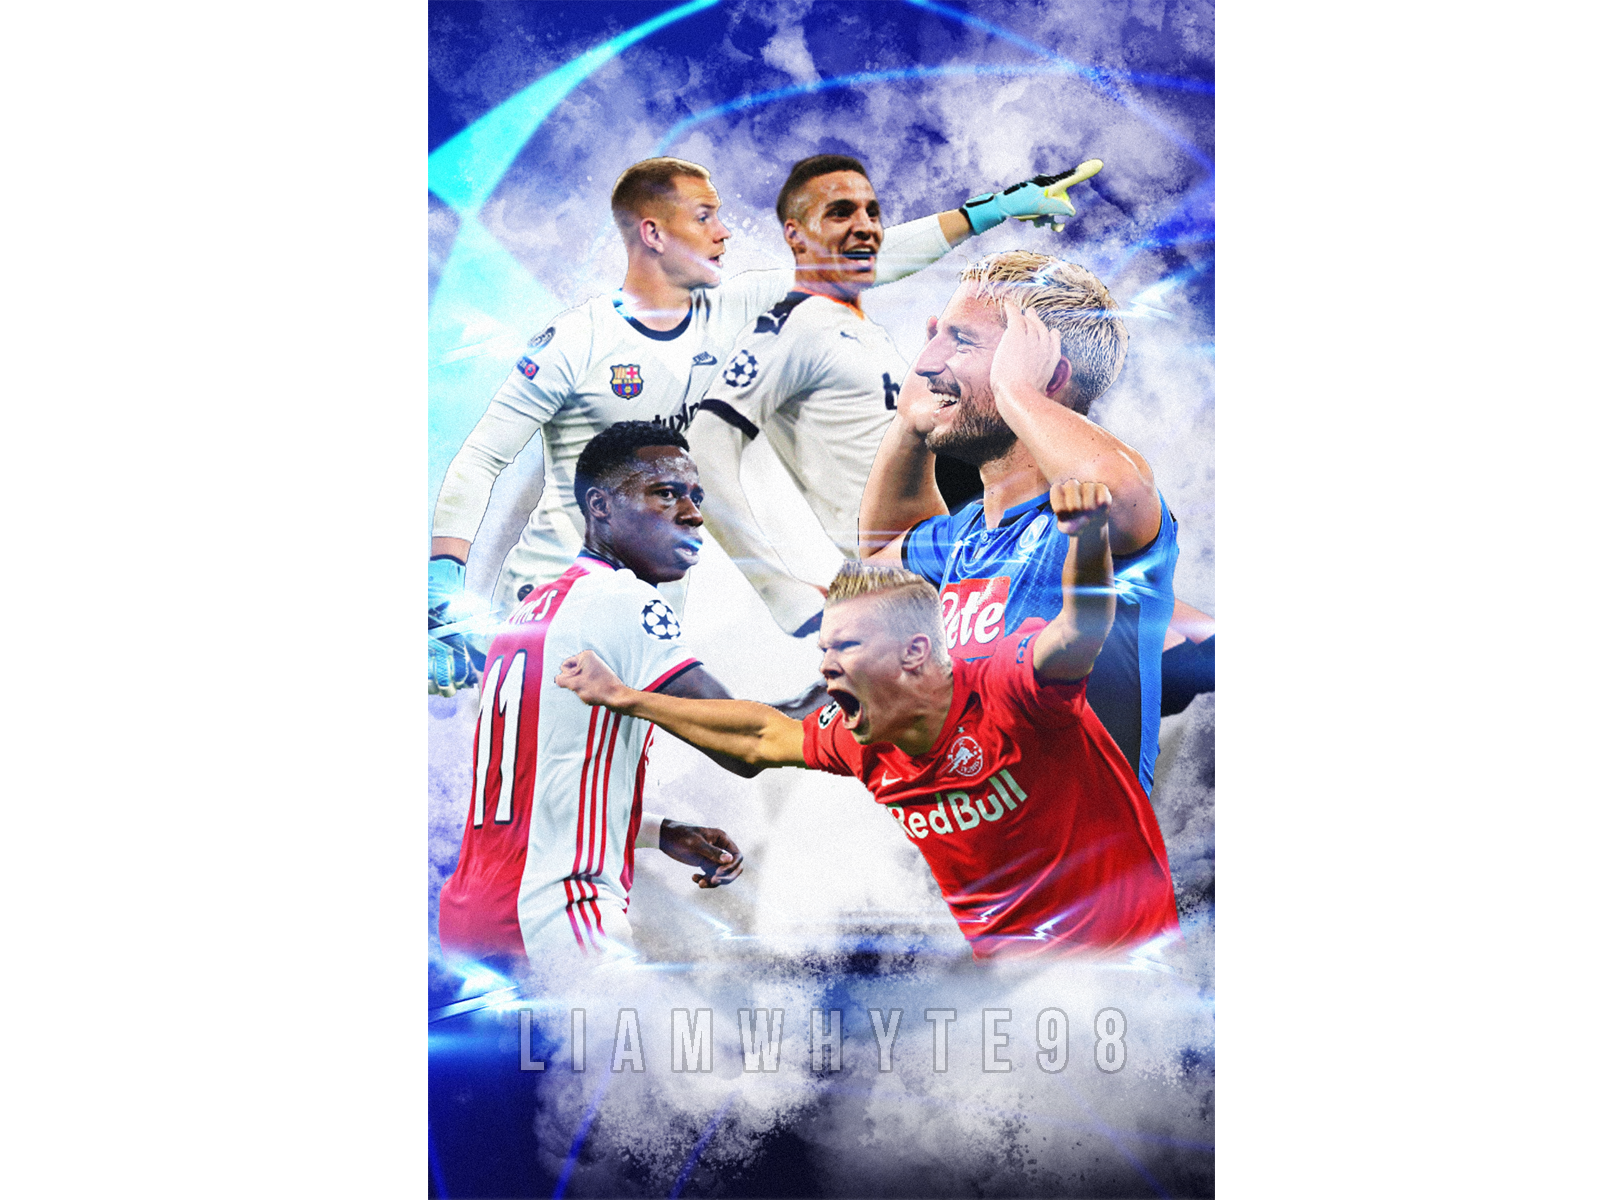 Champions League Group Stage Day 1 Recap Design By Liam Whyte On Images, Photos, Reviews